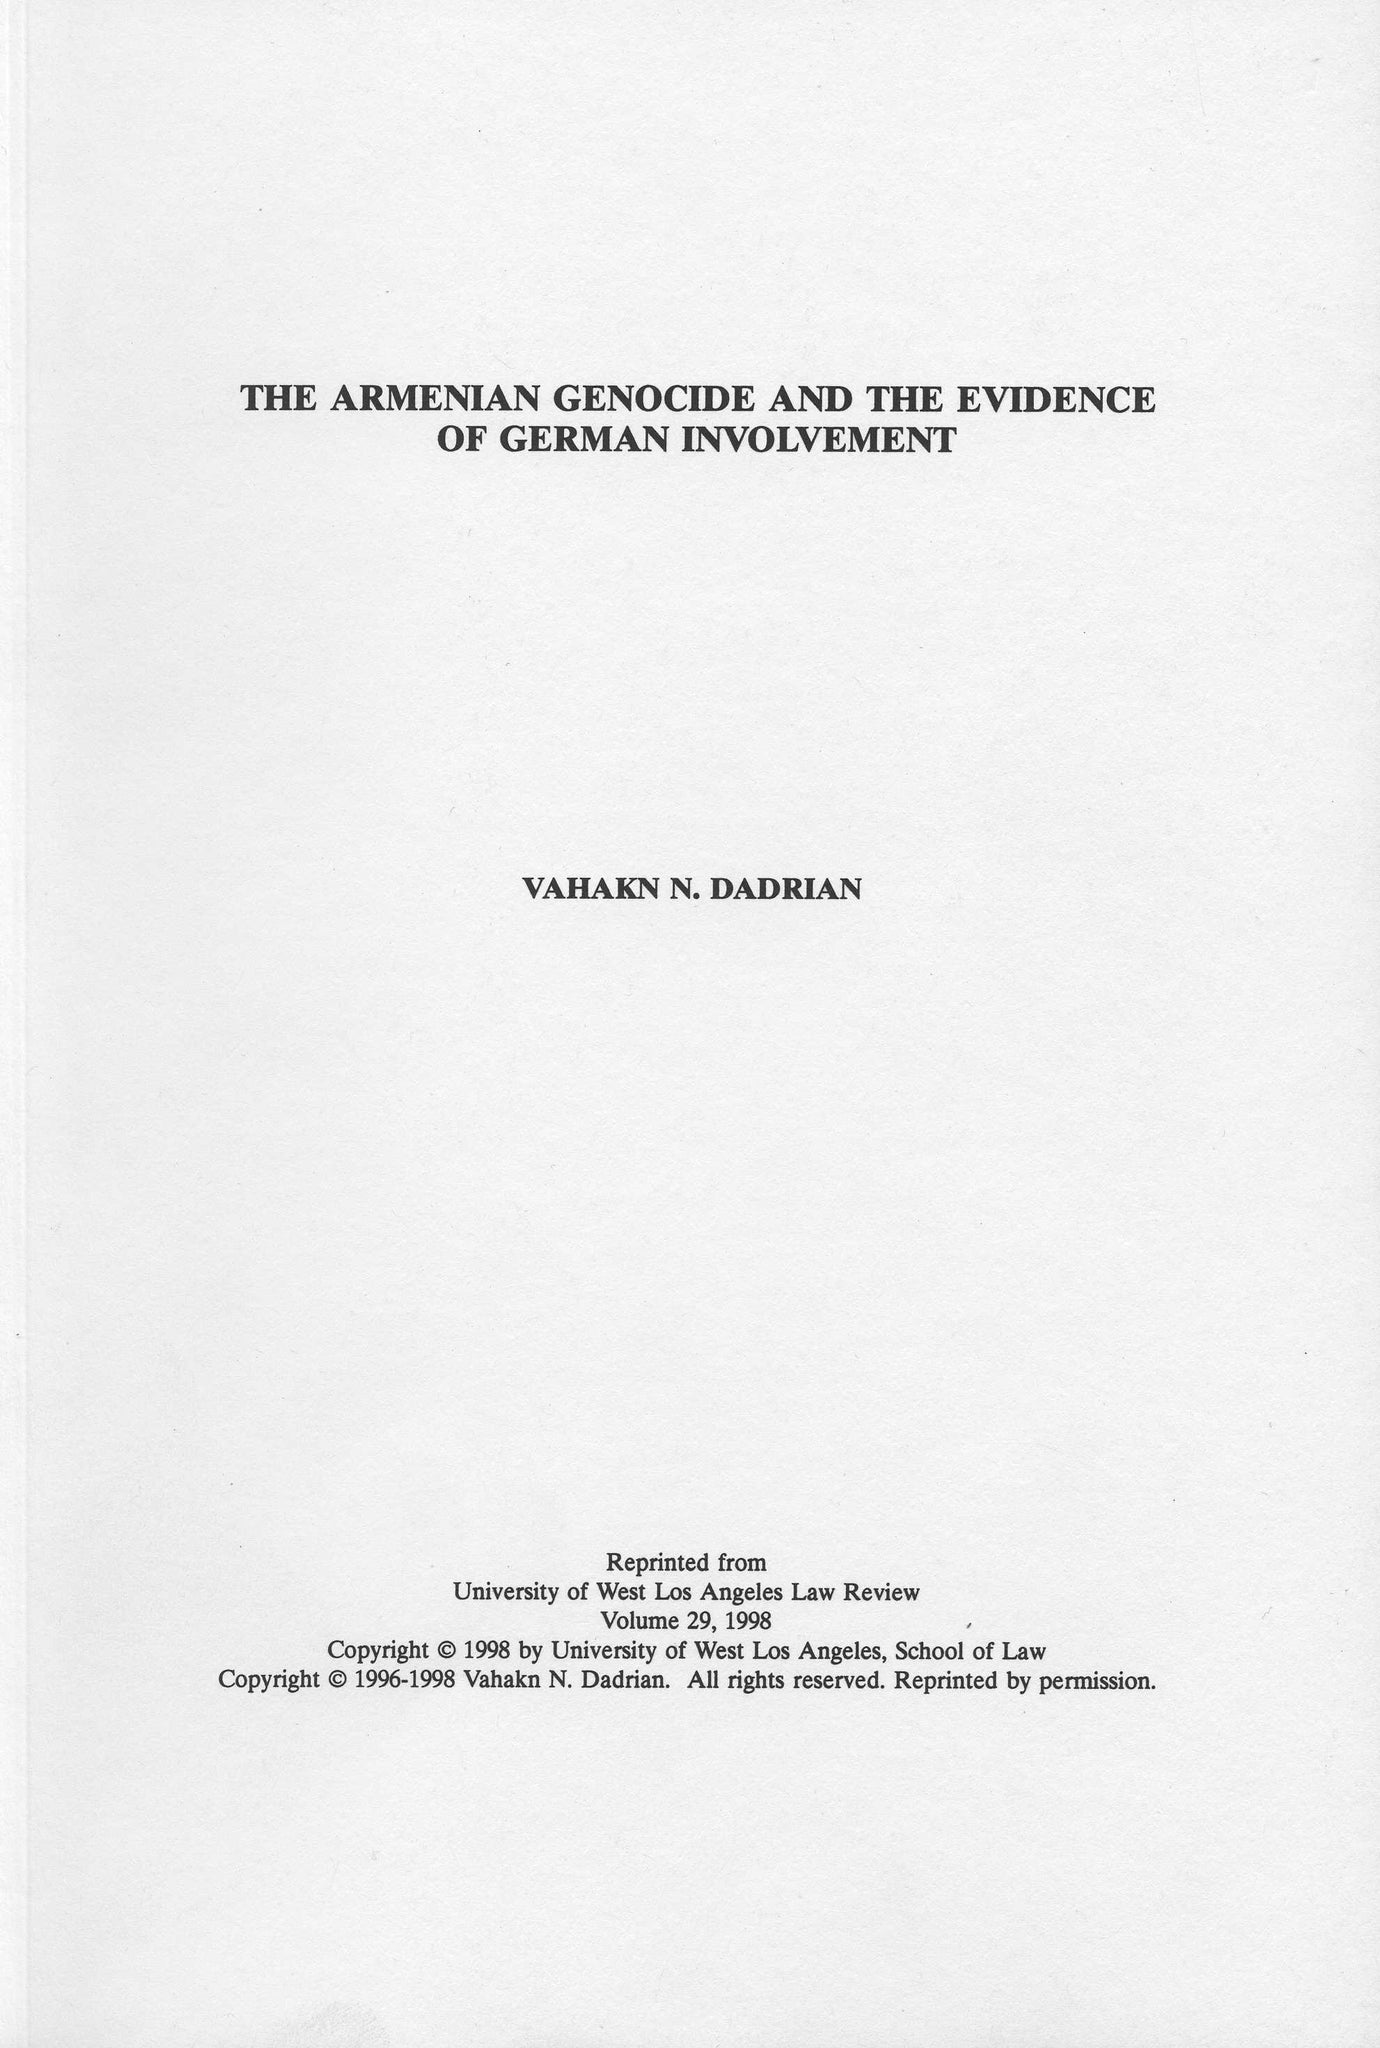 Armenian Genocide and the Evidence of German Involvement, The